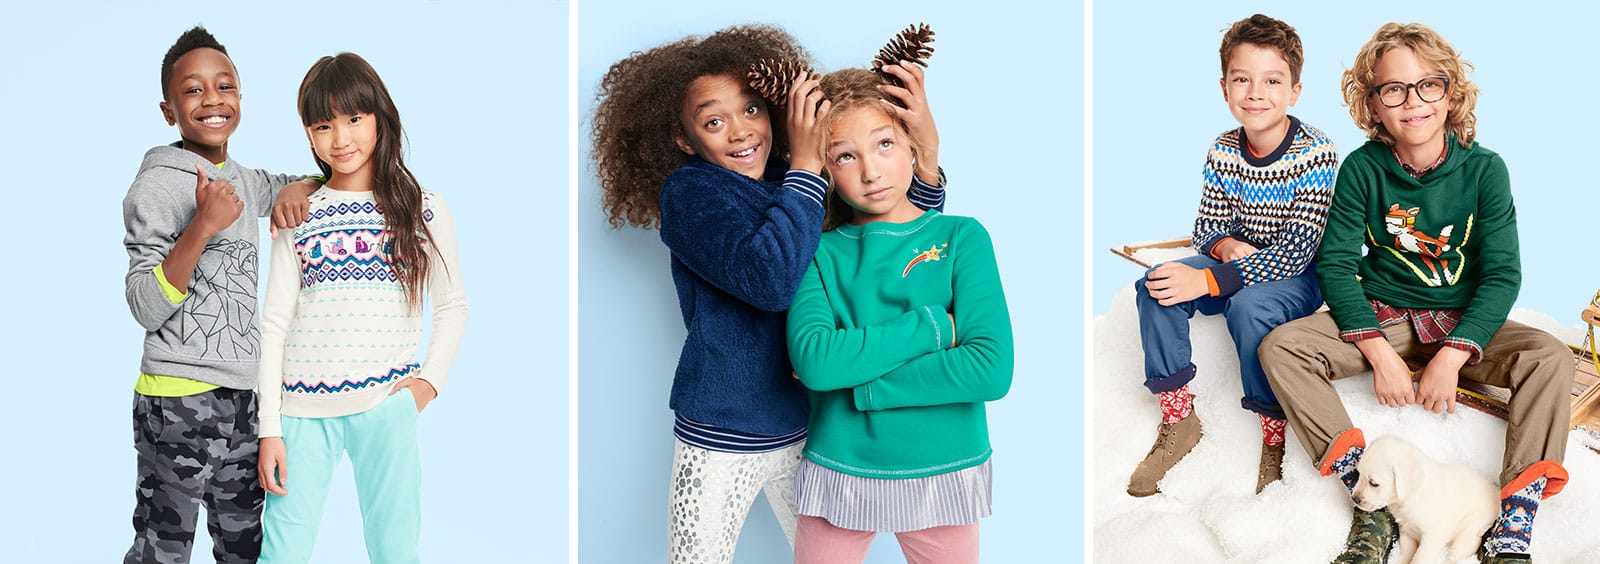 Clothing Gifts Your Kids Will Love to Open This Christmas